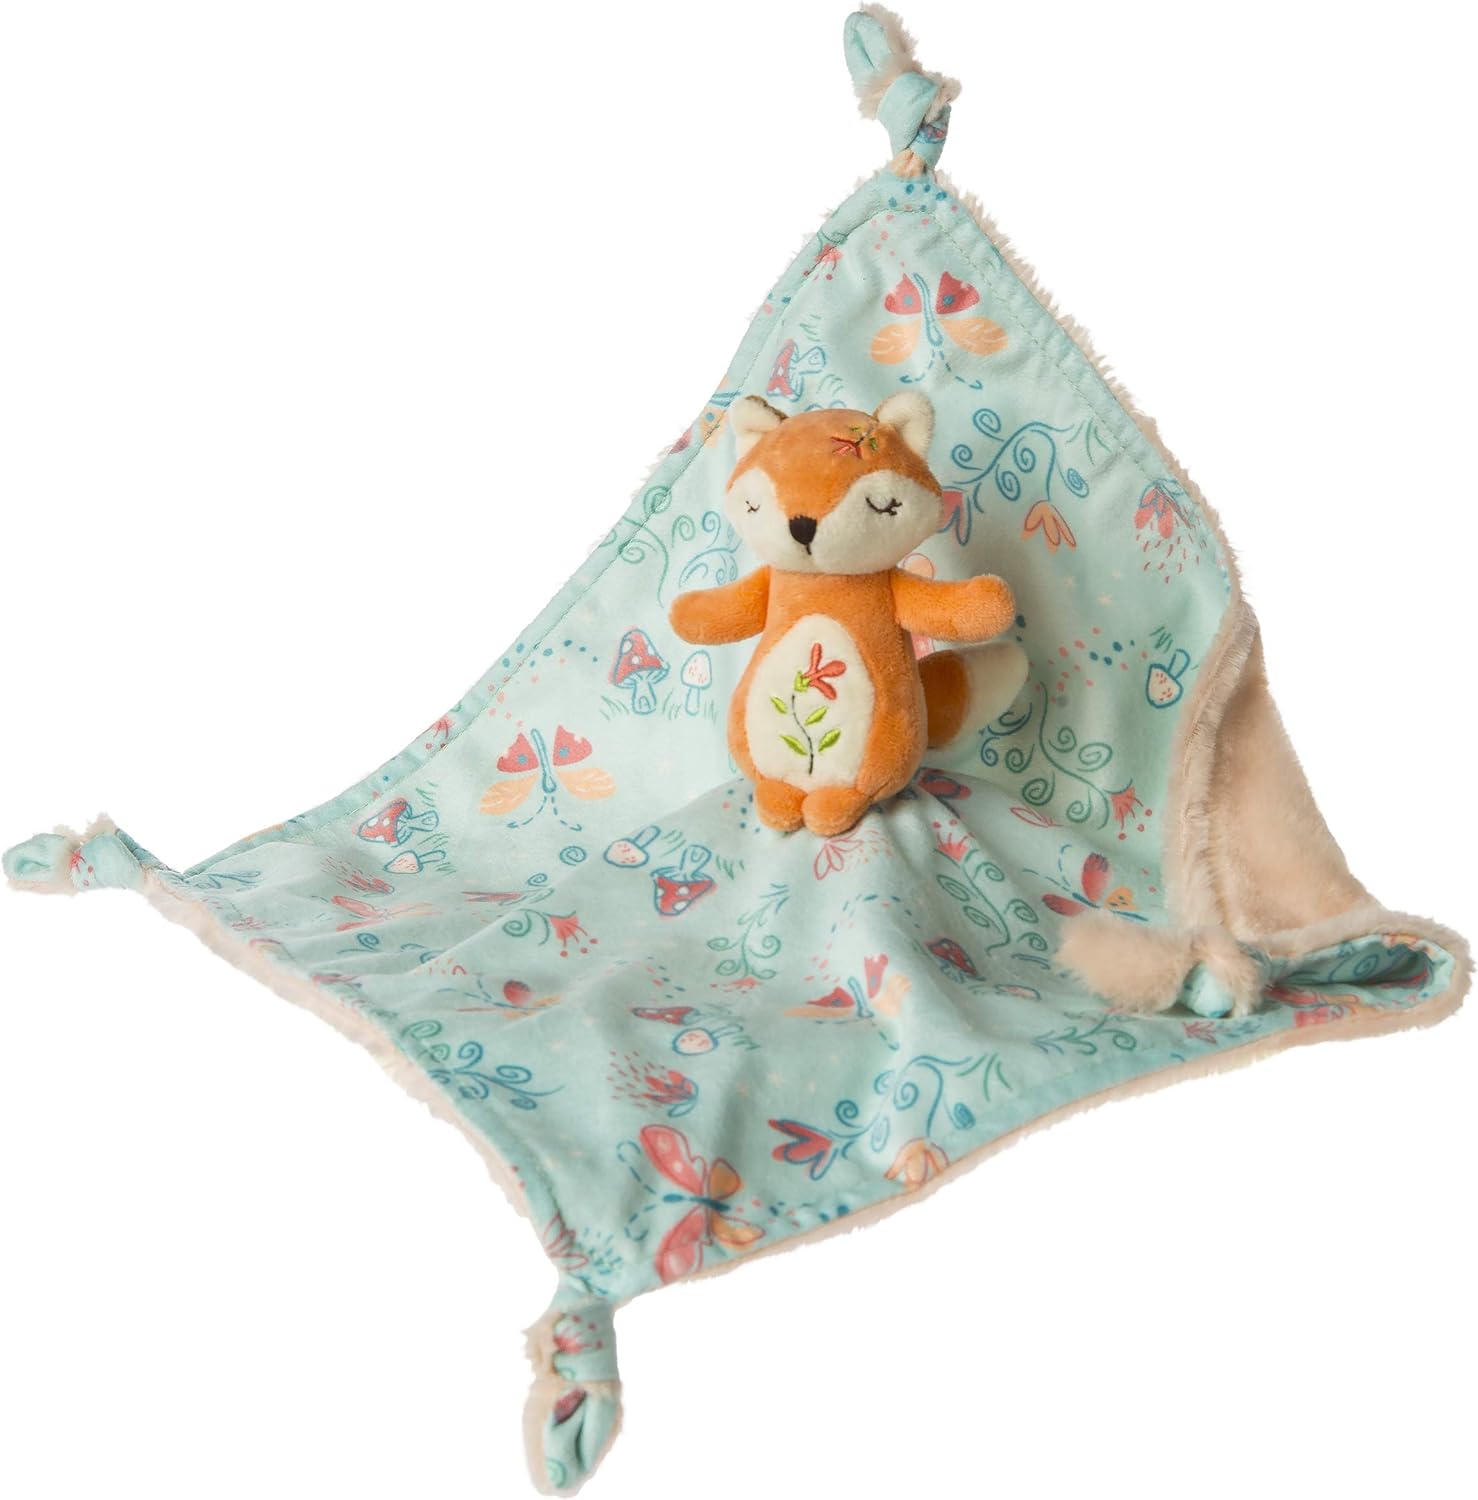 Light pink and blue comforter with a &#39;fairyland forest&#39; design and an attached soft fox